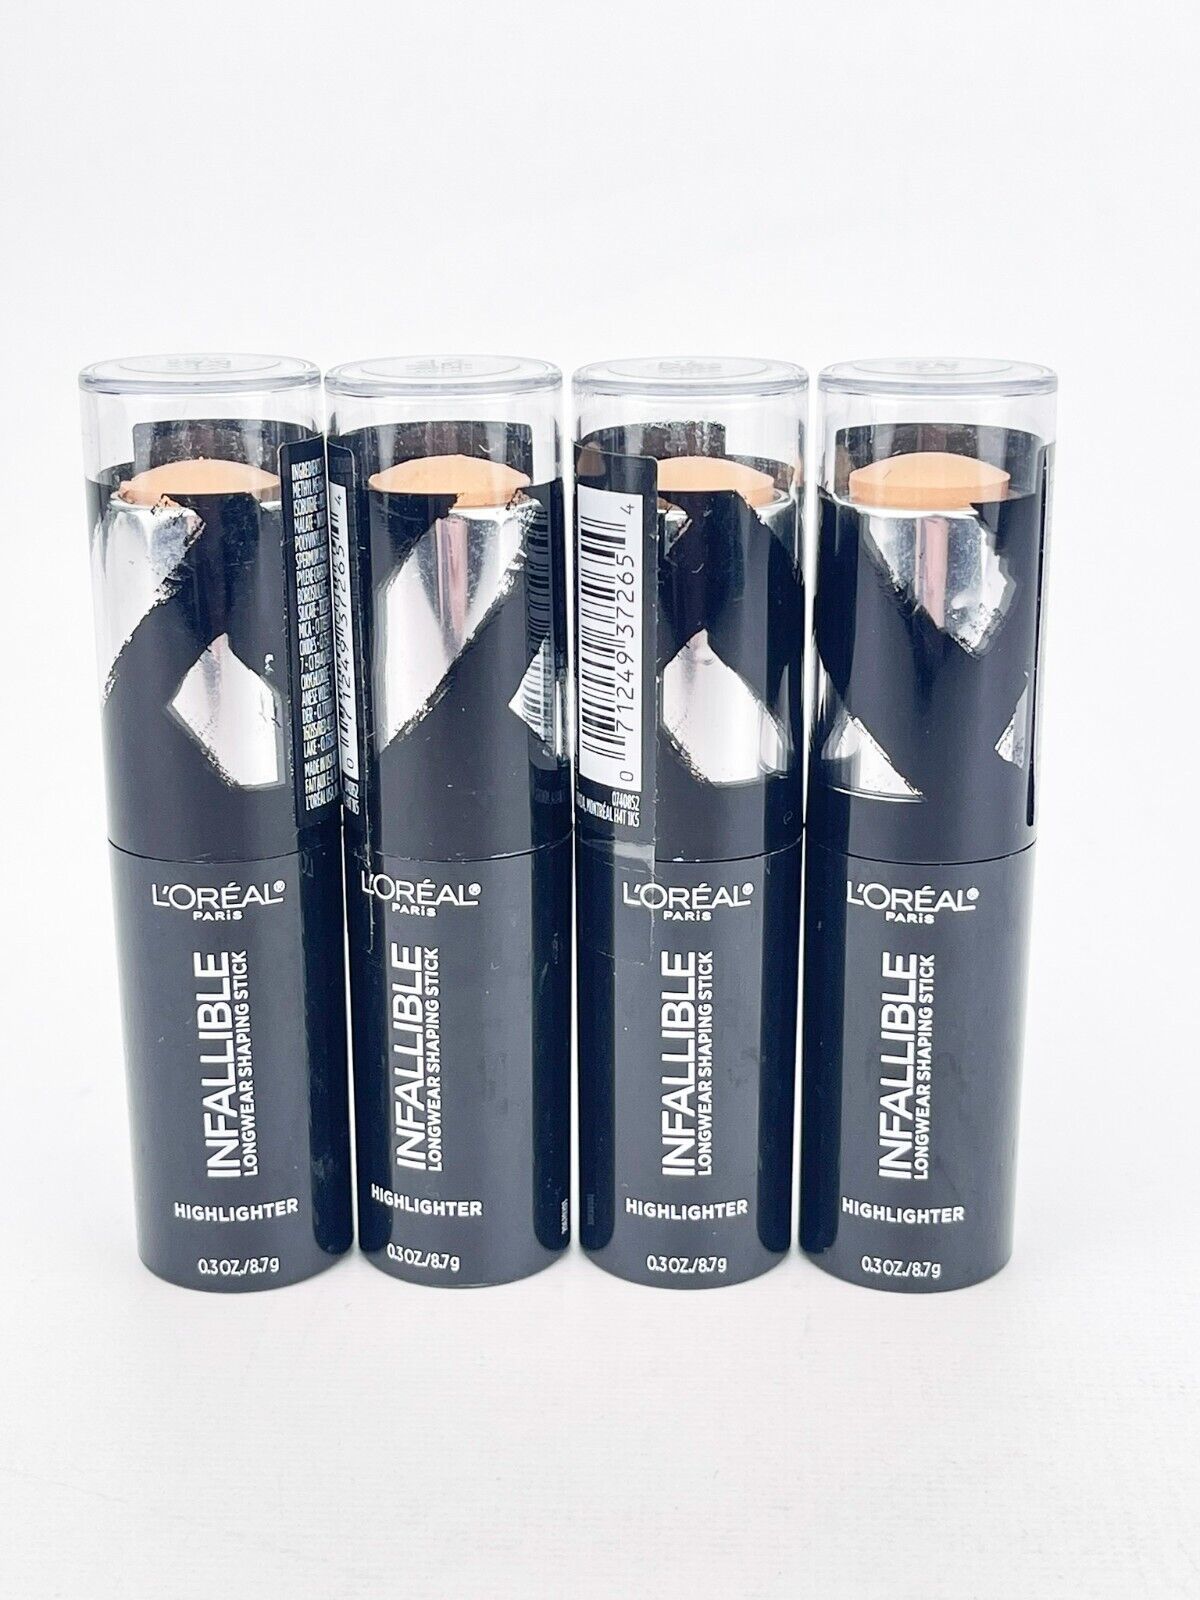 LOreal Infallible Longwear Highlighter Shaping Stick 42 Gold Is Cold Lot Of 4 - $22.20